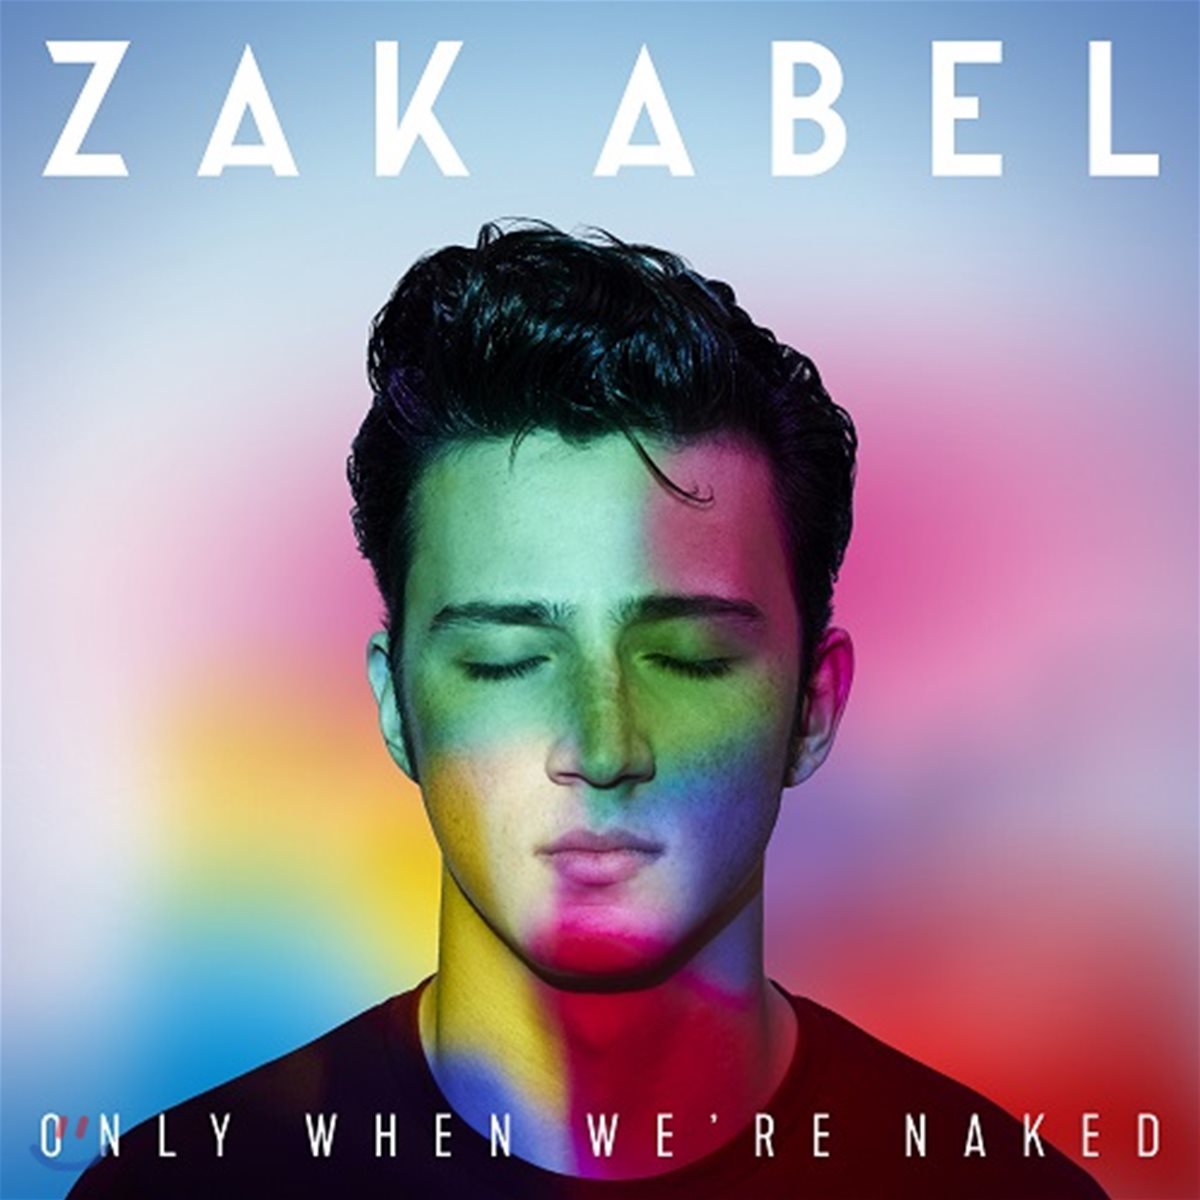 Zak Abel (잭 아벨) - Only When We're Naked